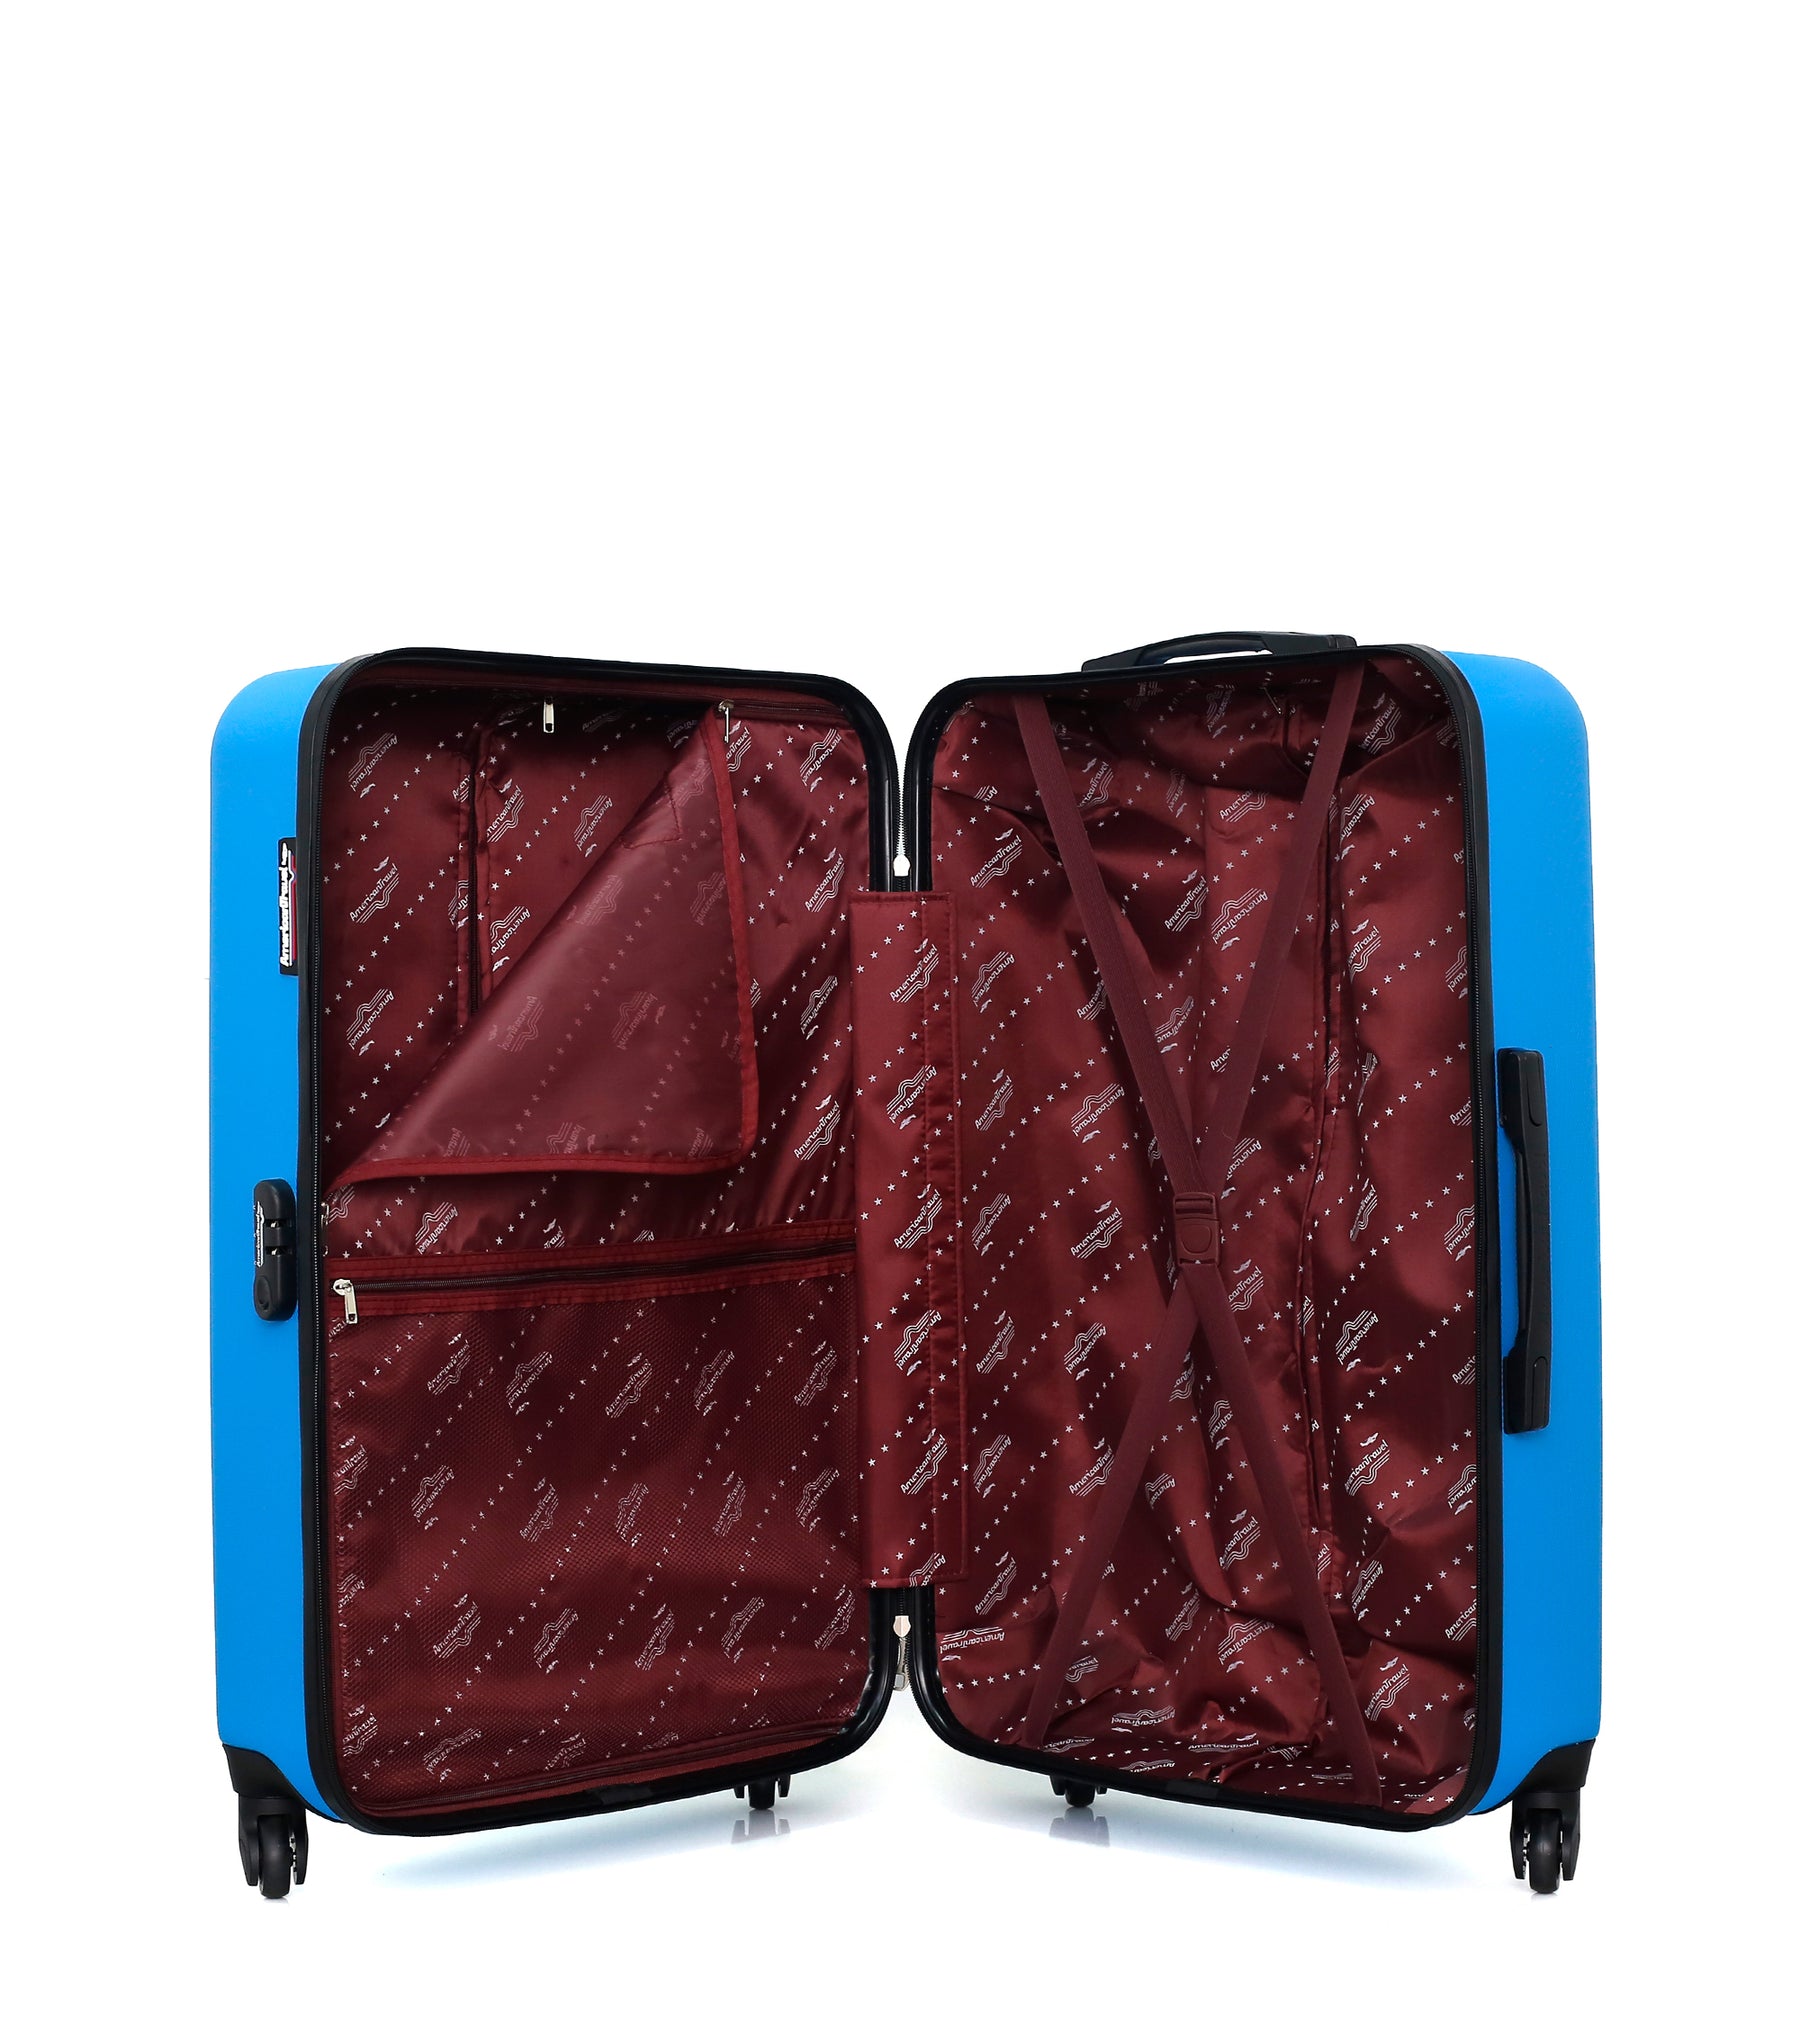 Valise Grand Format ABS BRONX 4 Roues 75 cm